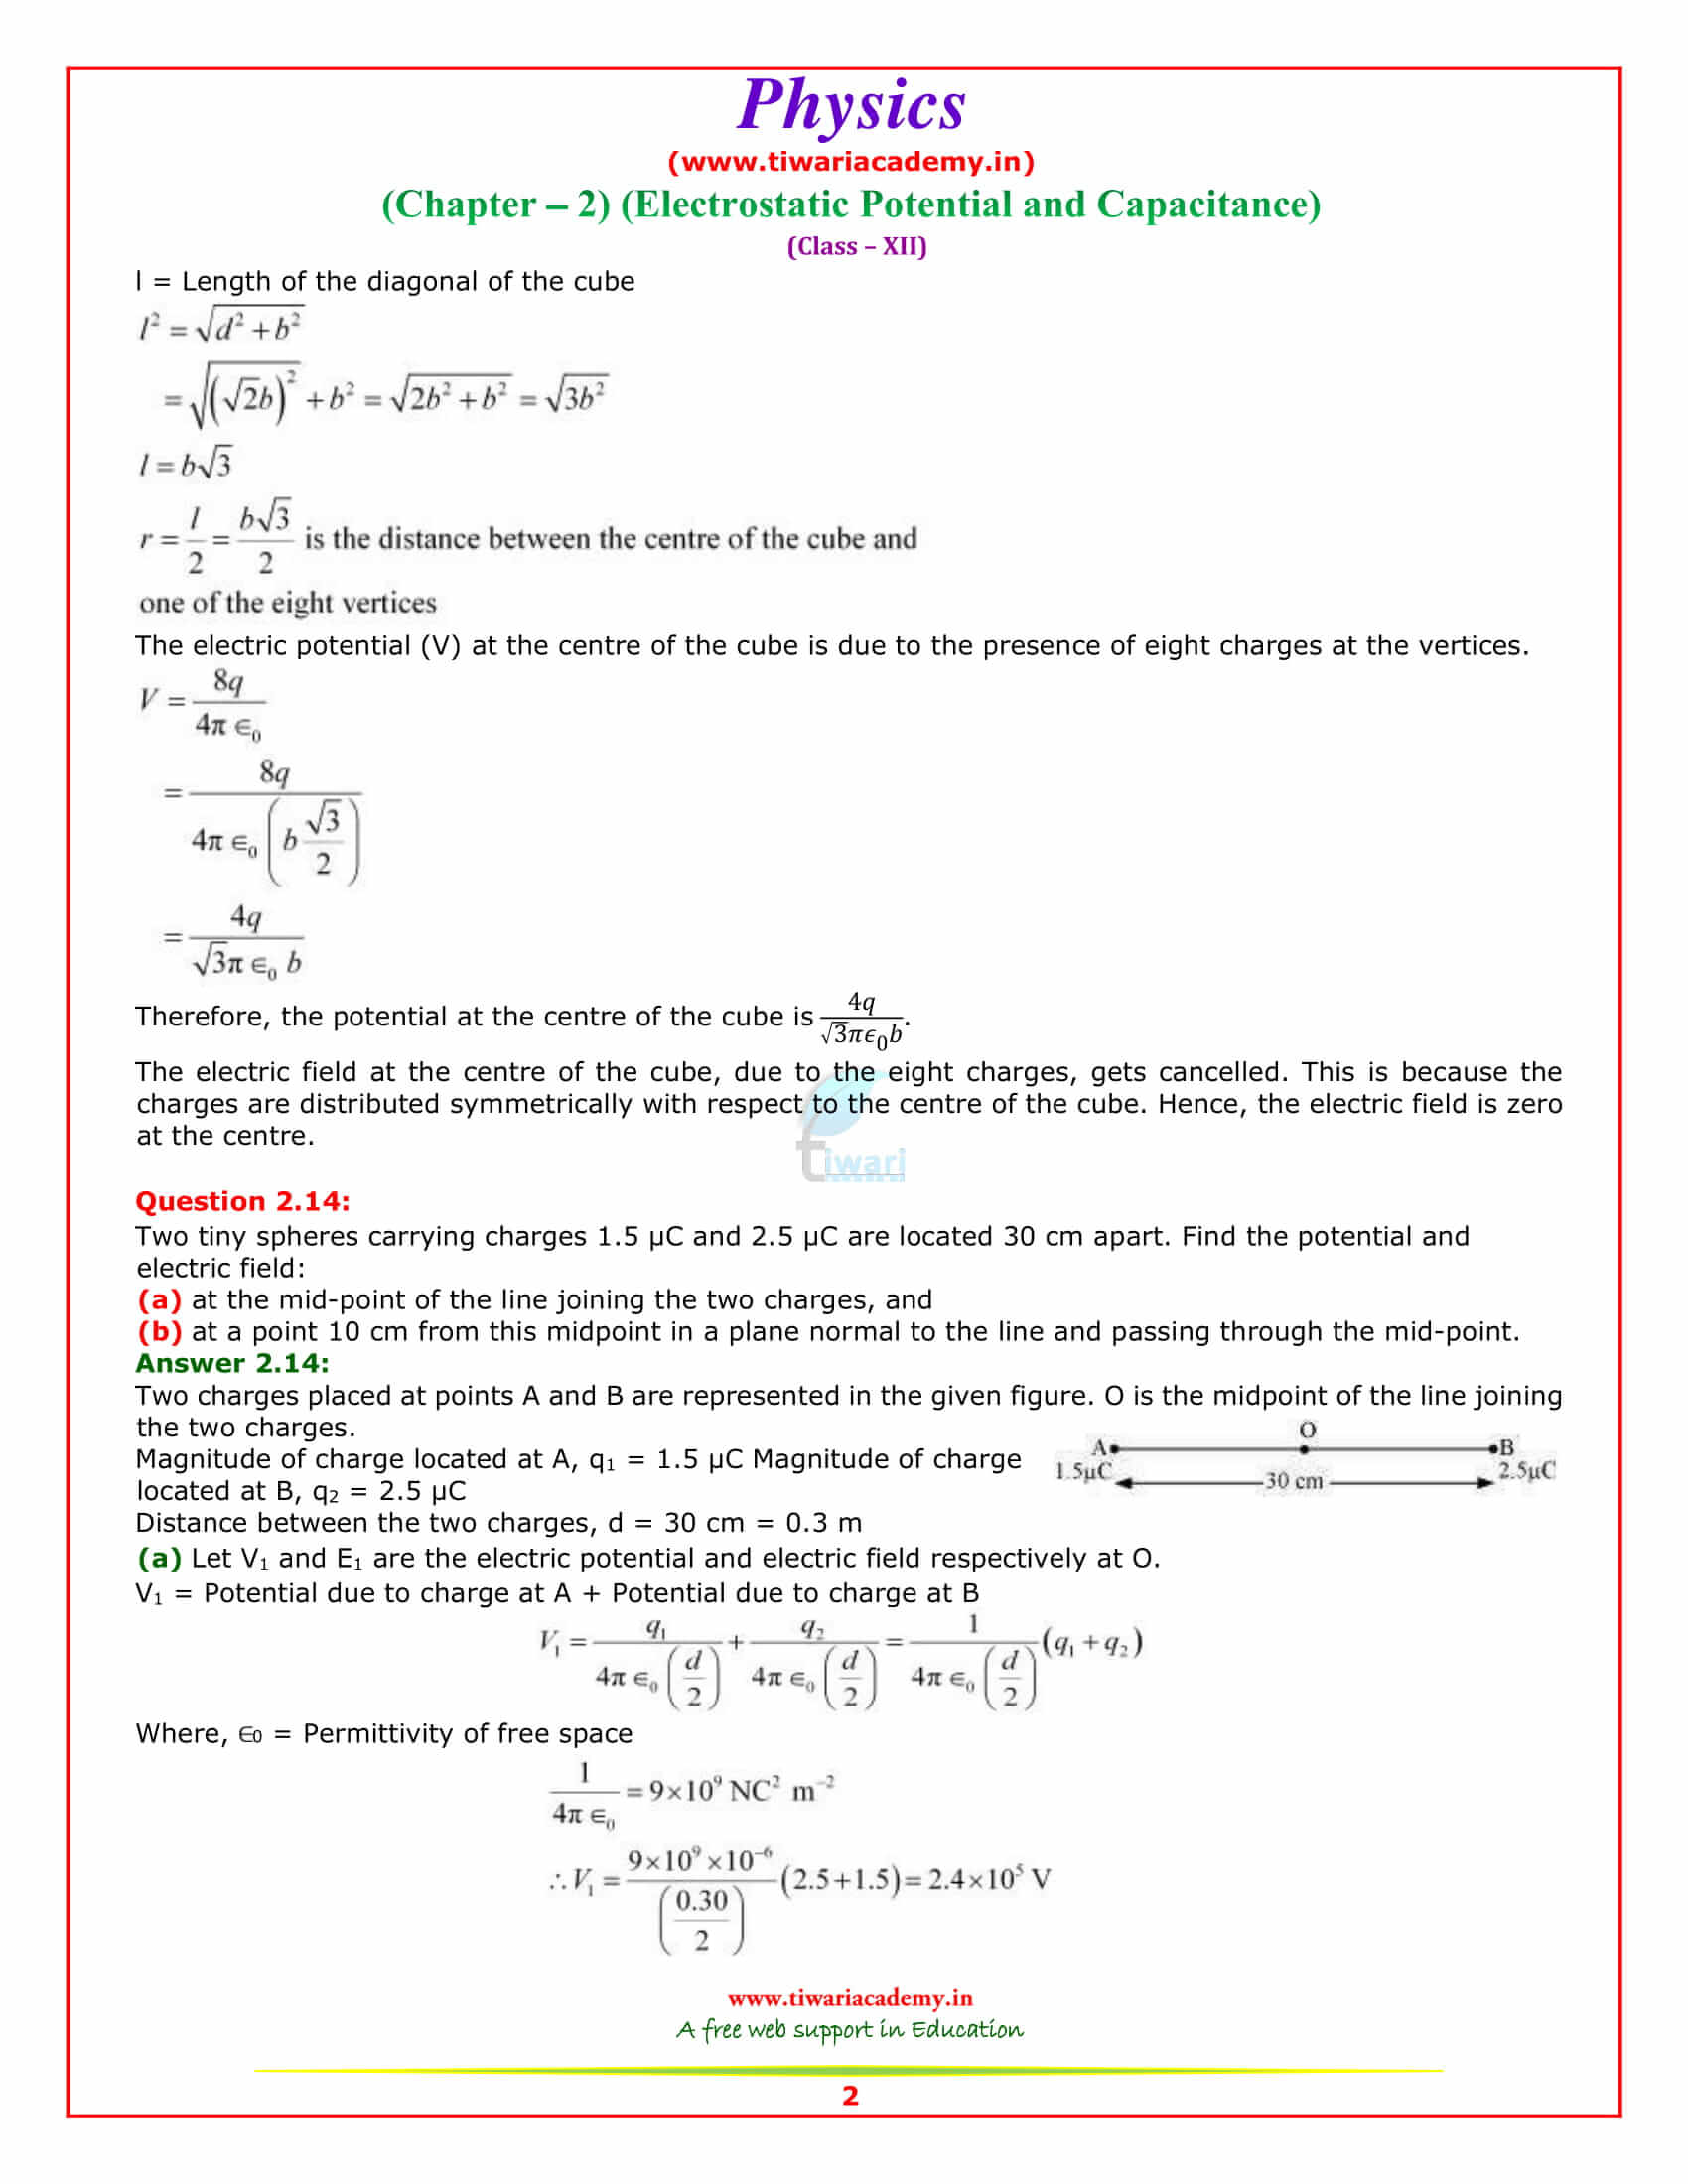 NCERT Solutions for Class 12 Physics Chapter 2 free in pdf